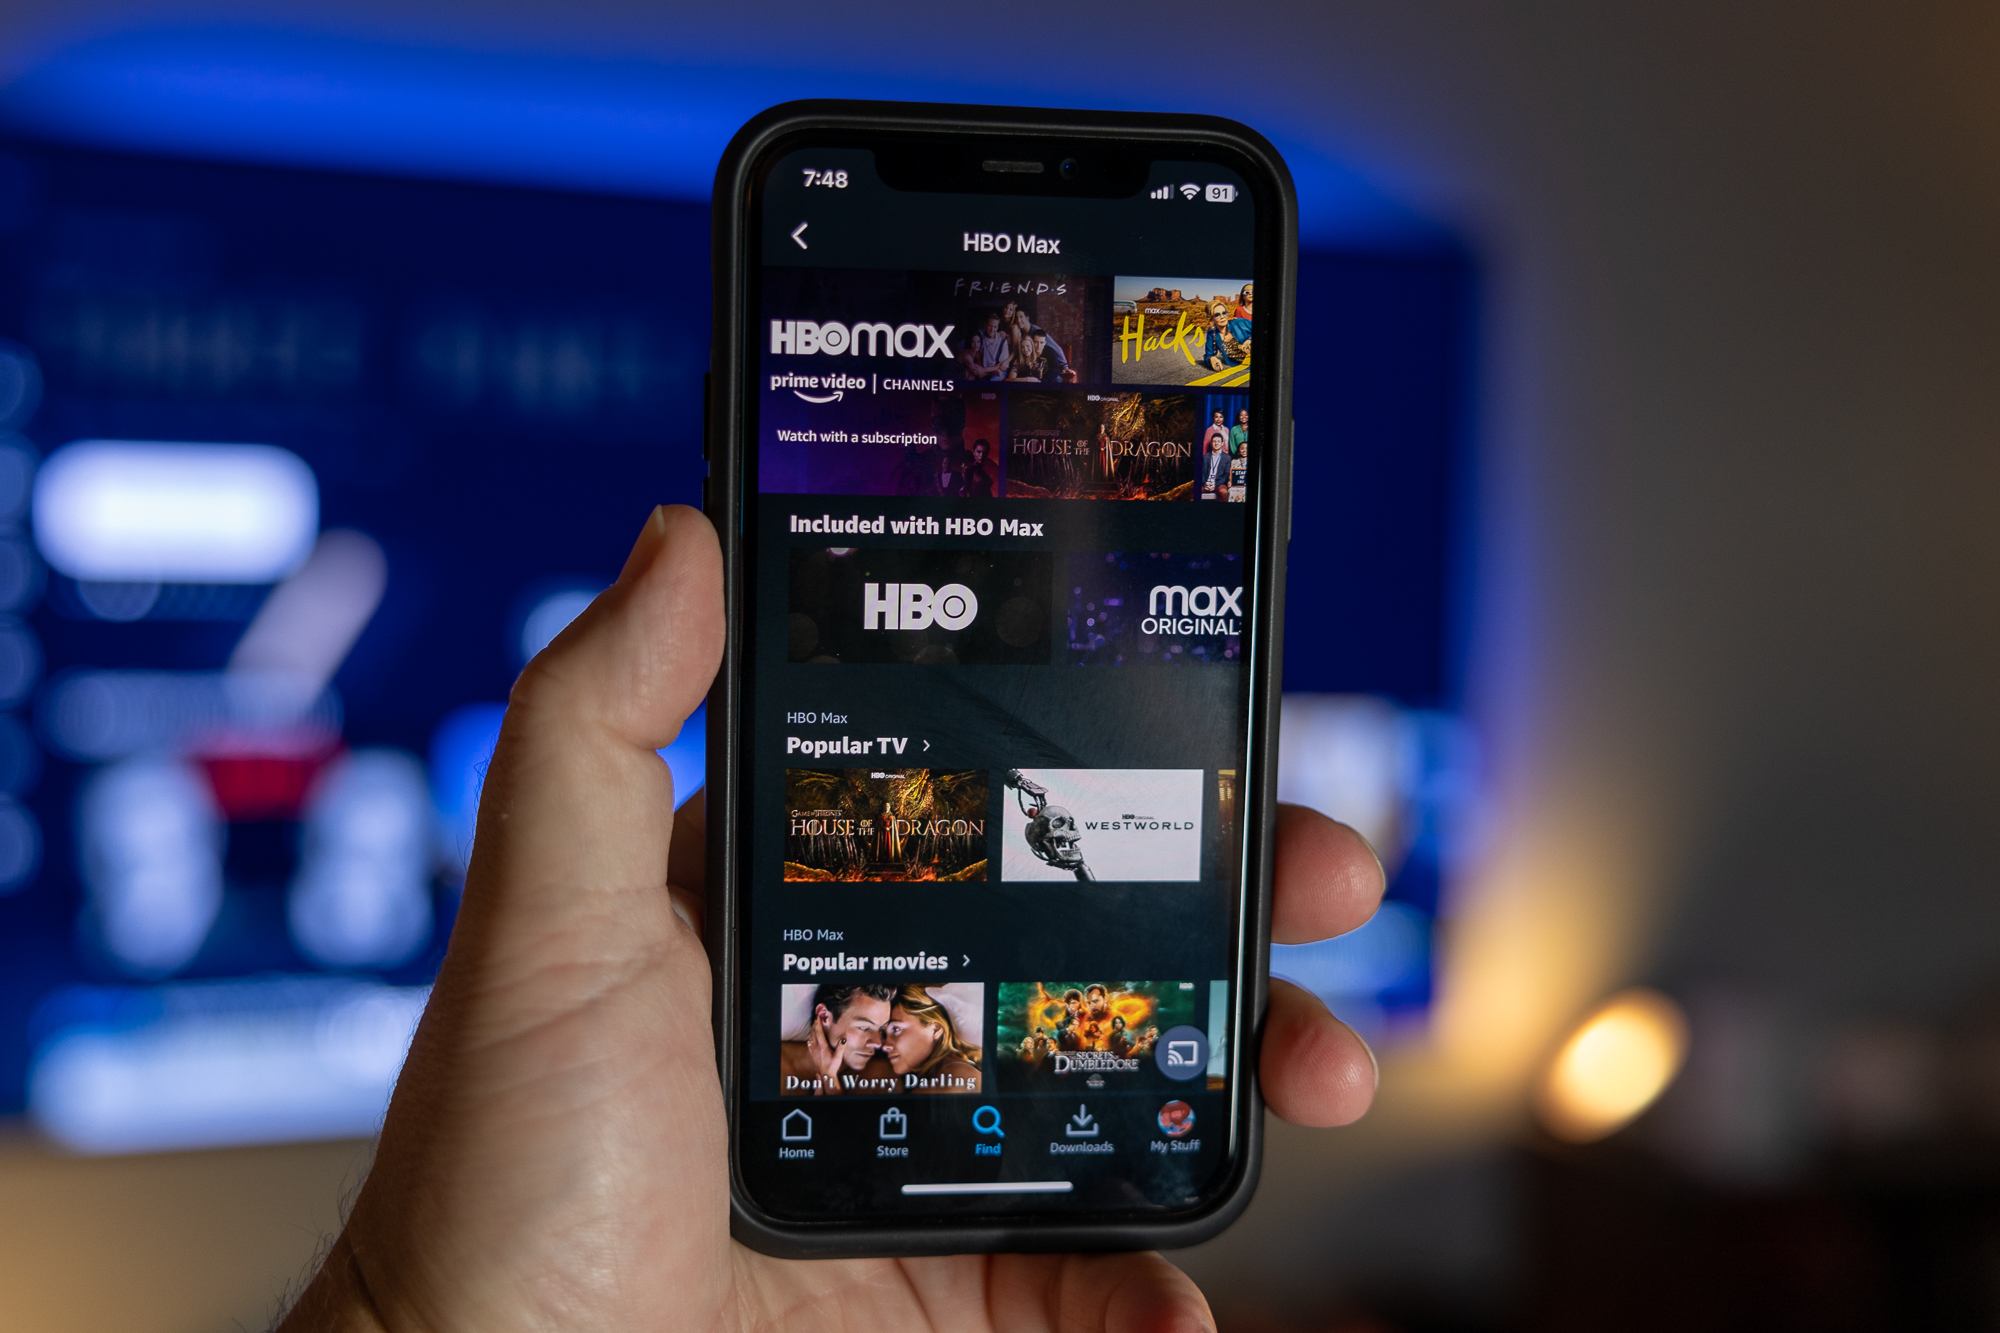 Which add-on channels (HBO, AMC) offer free trials on Prime Video